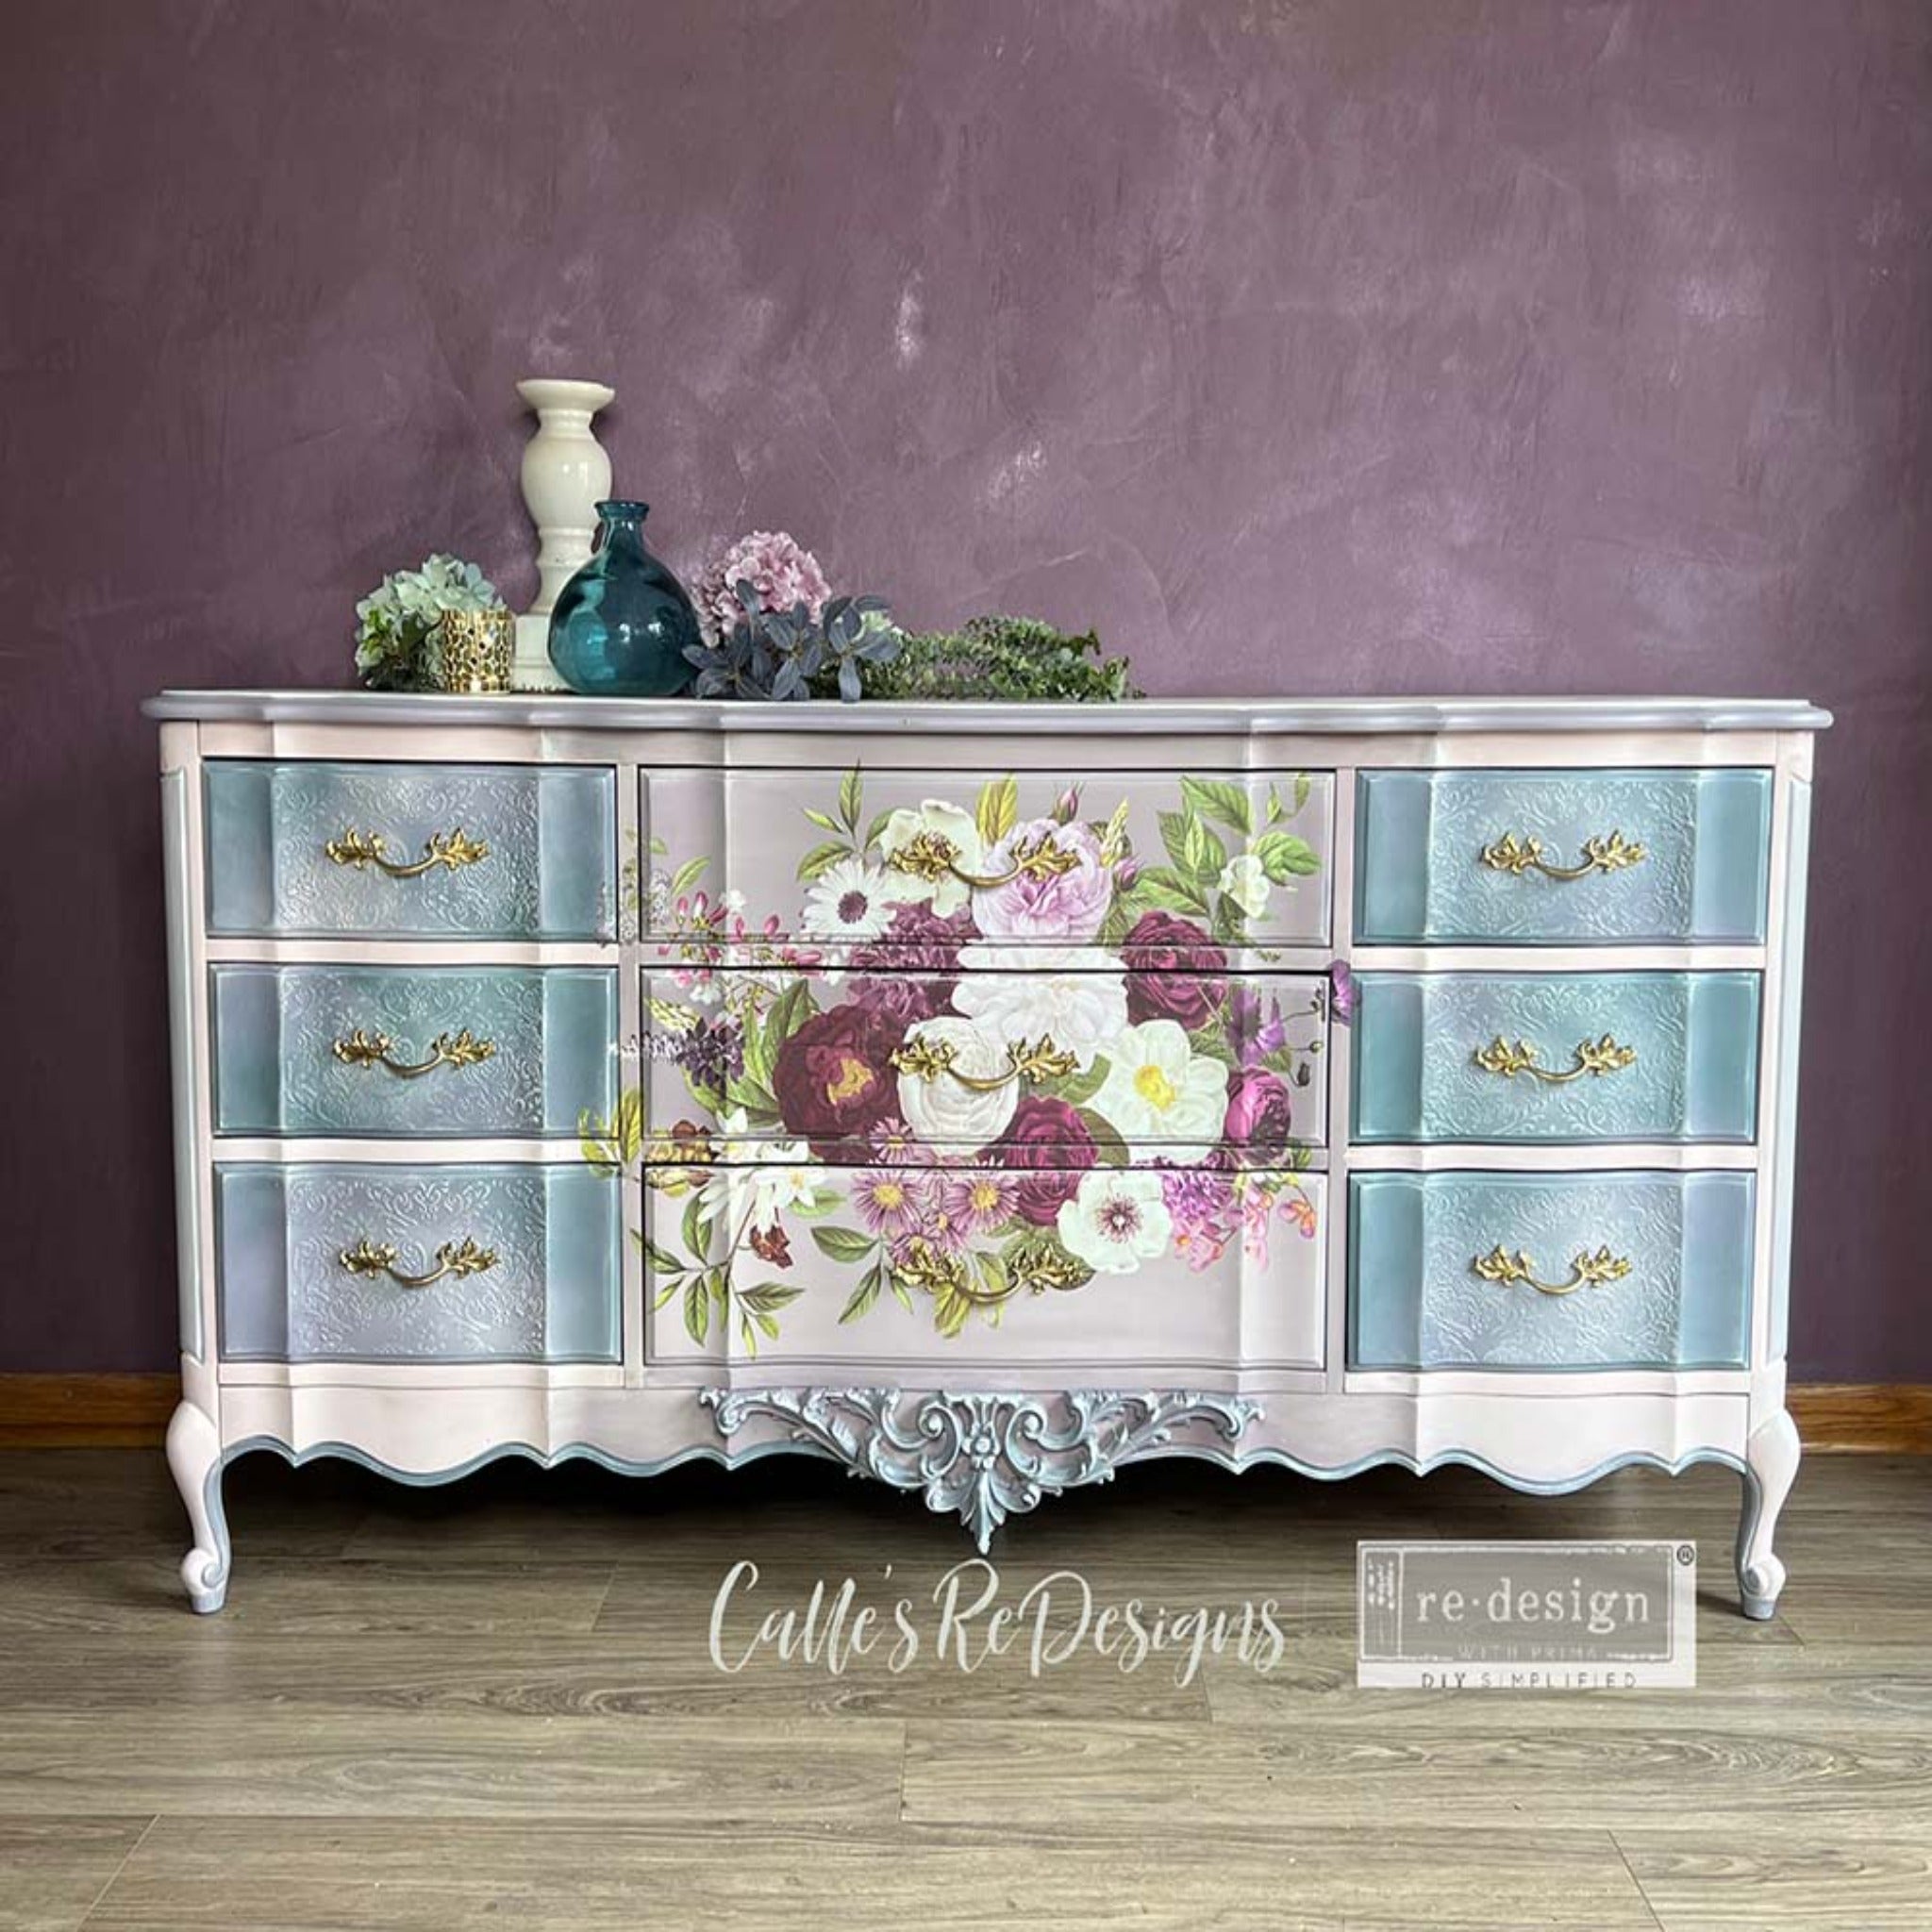 A vintage large 9 drawer dresser refurbished by Calle's ReDesigns is painted light beige and features ReDesign with Prima's Kacha Morning Purple transfer on its 3 center drawers. The 6 drawers on the left and right side are painted light sky blue.